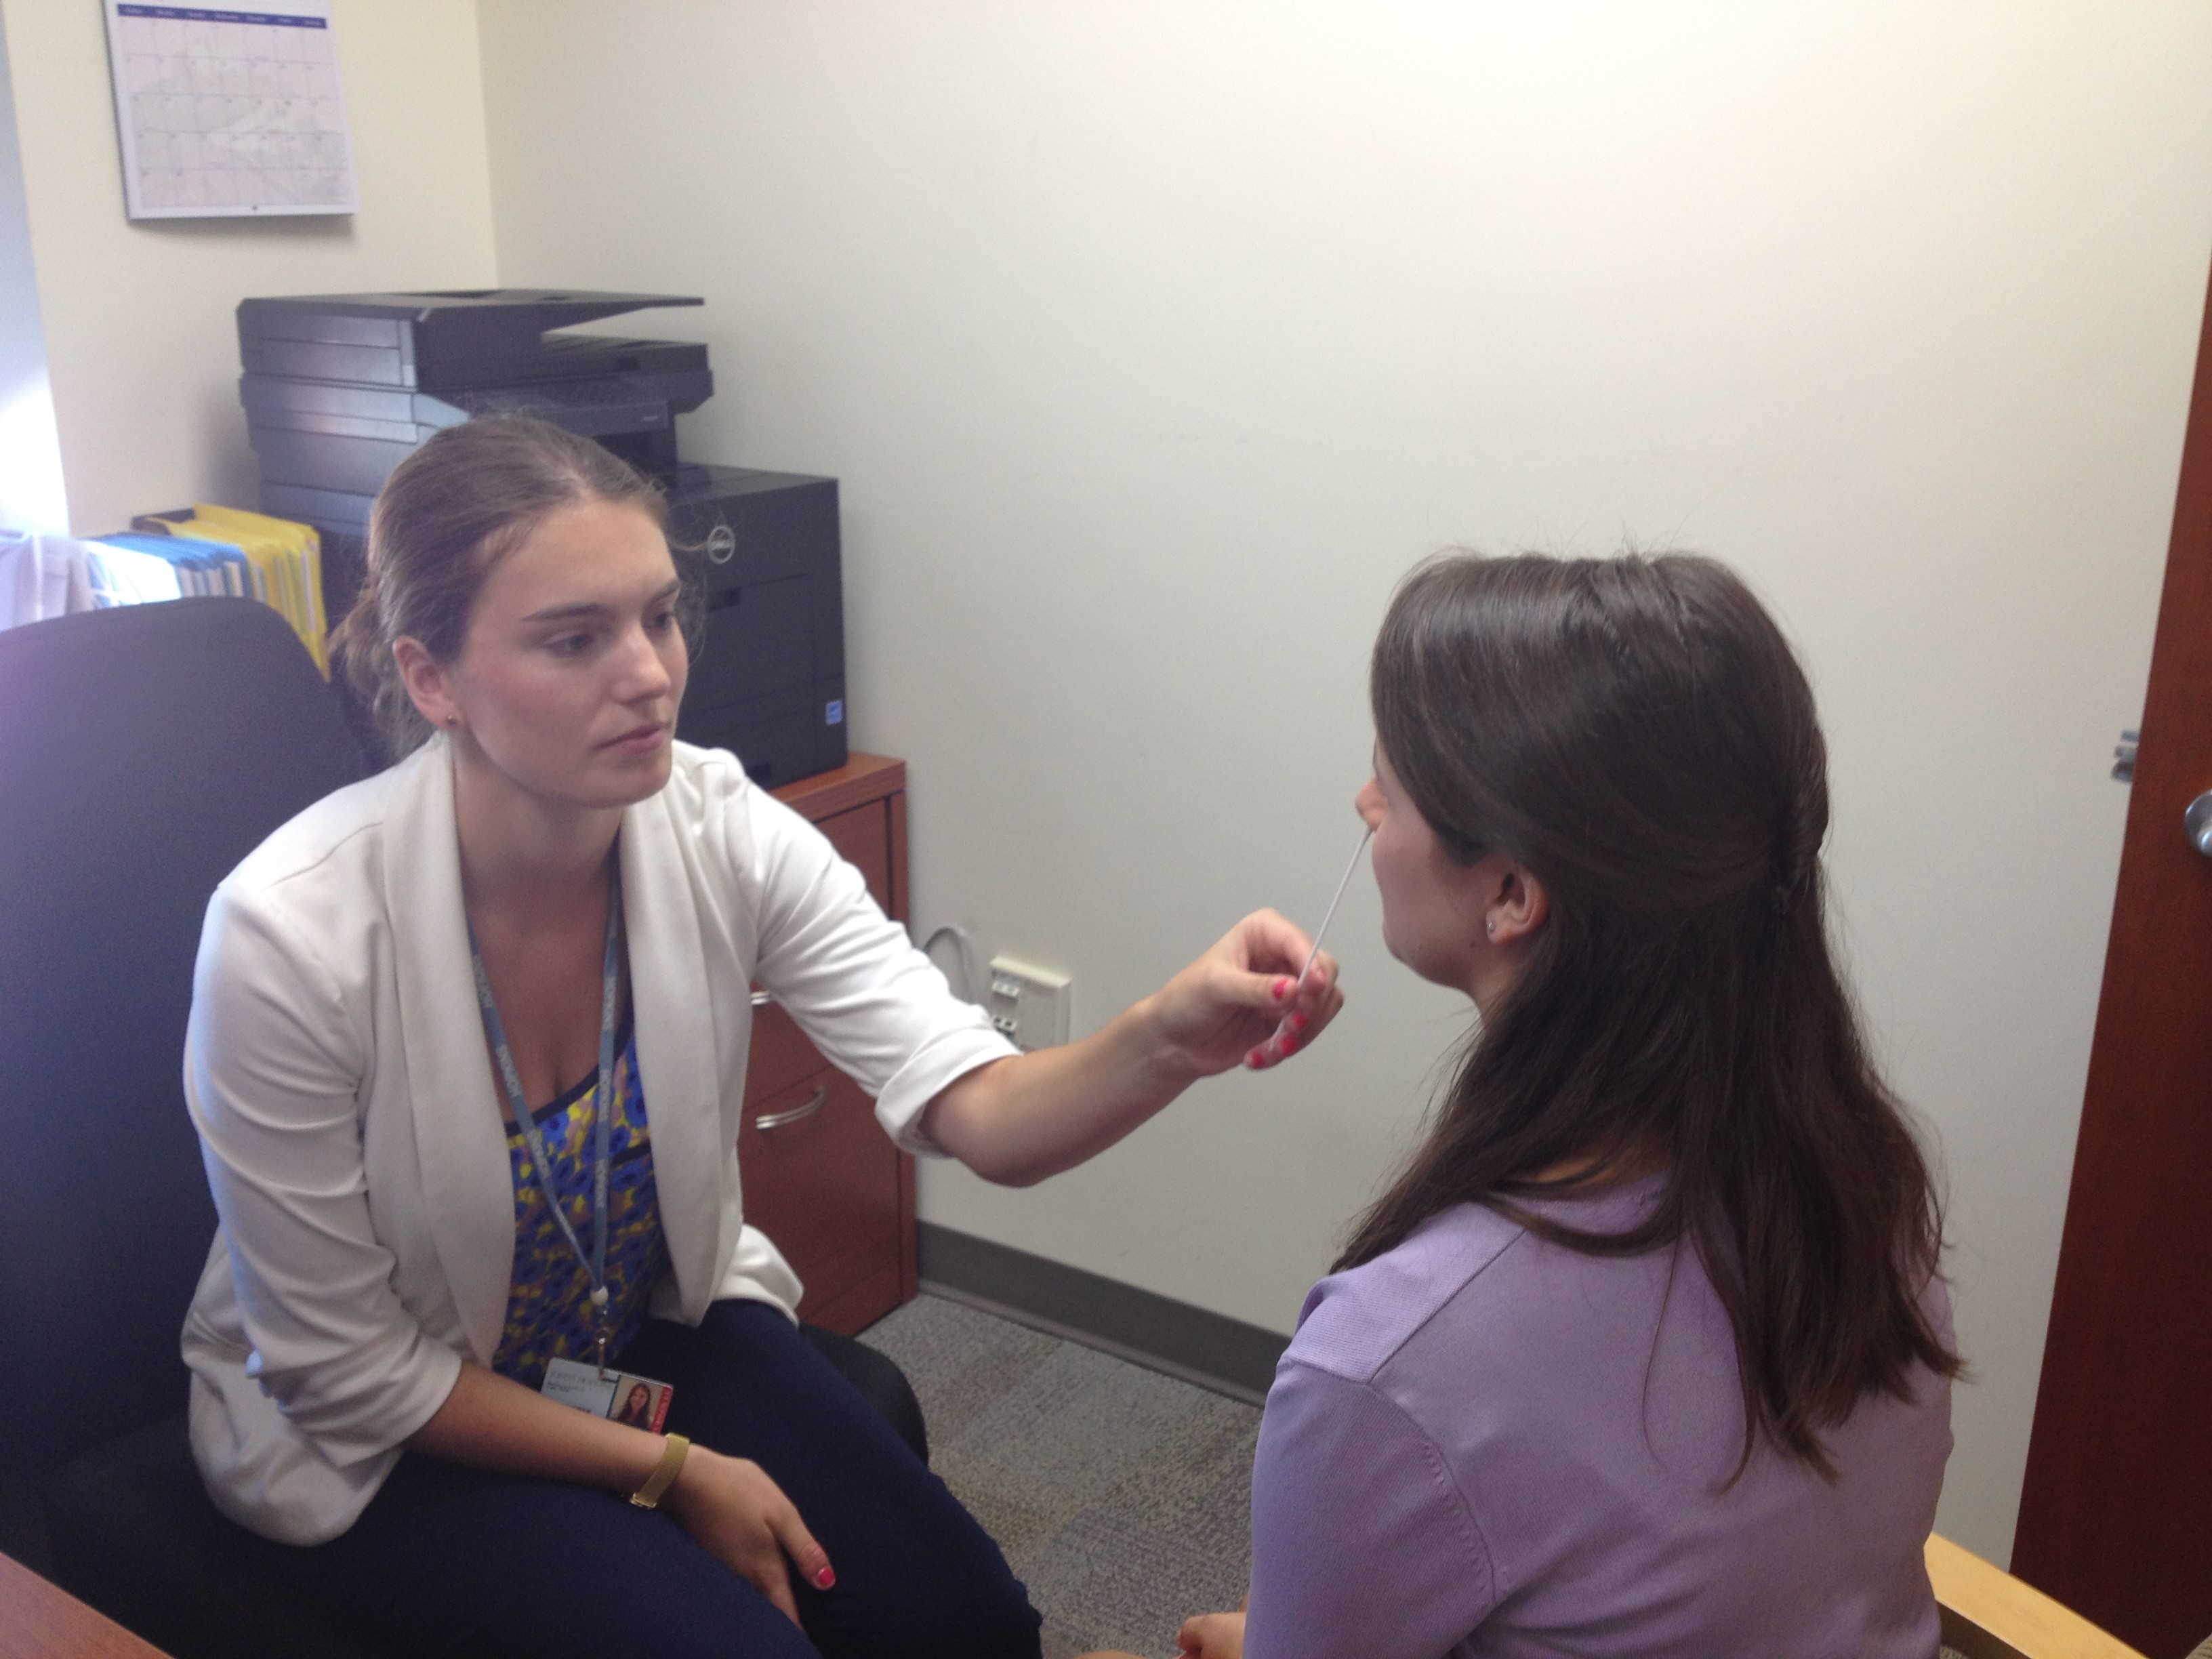 Practicing nasal swabs with Laura, a fellow research assistant